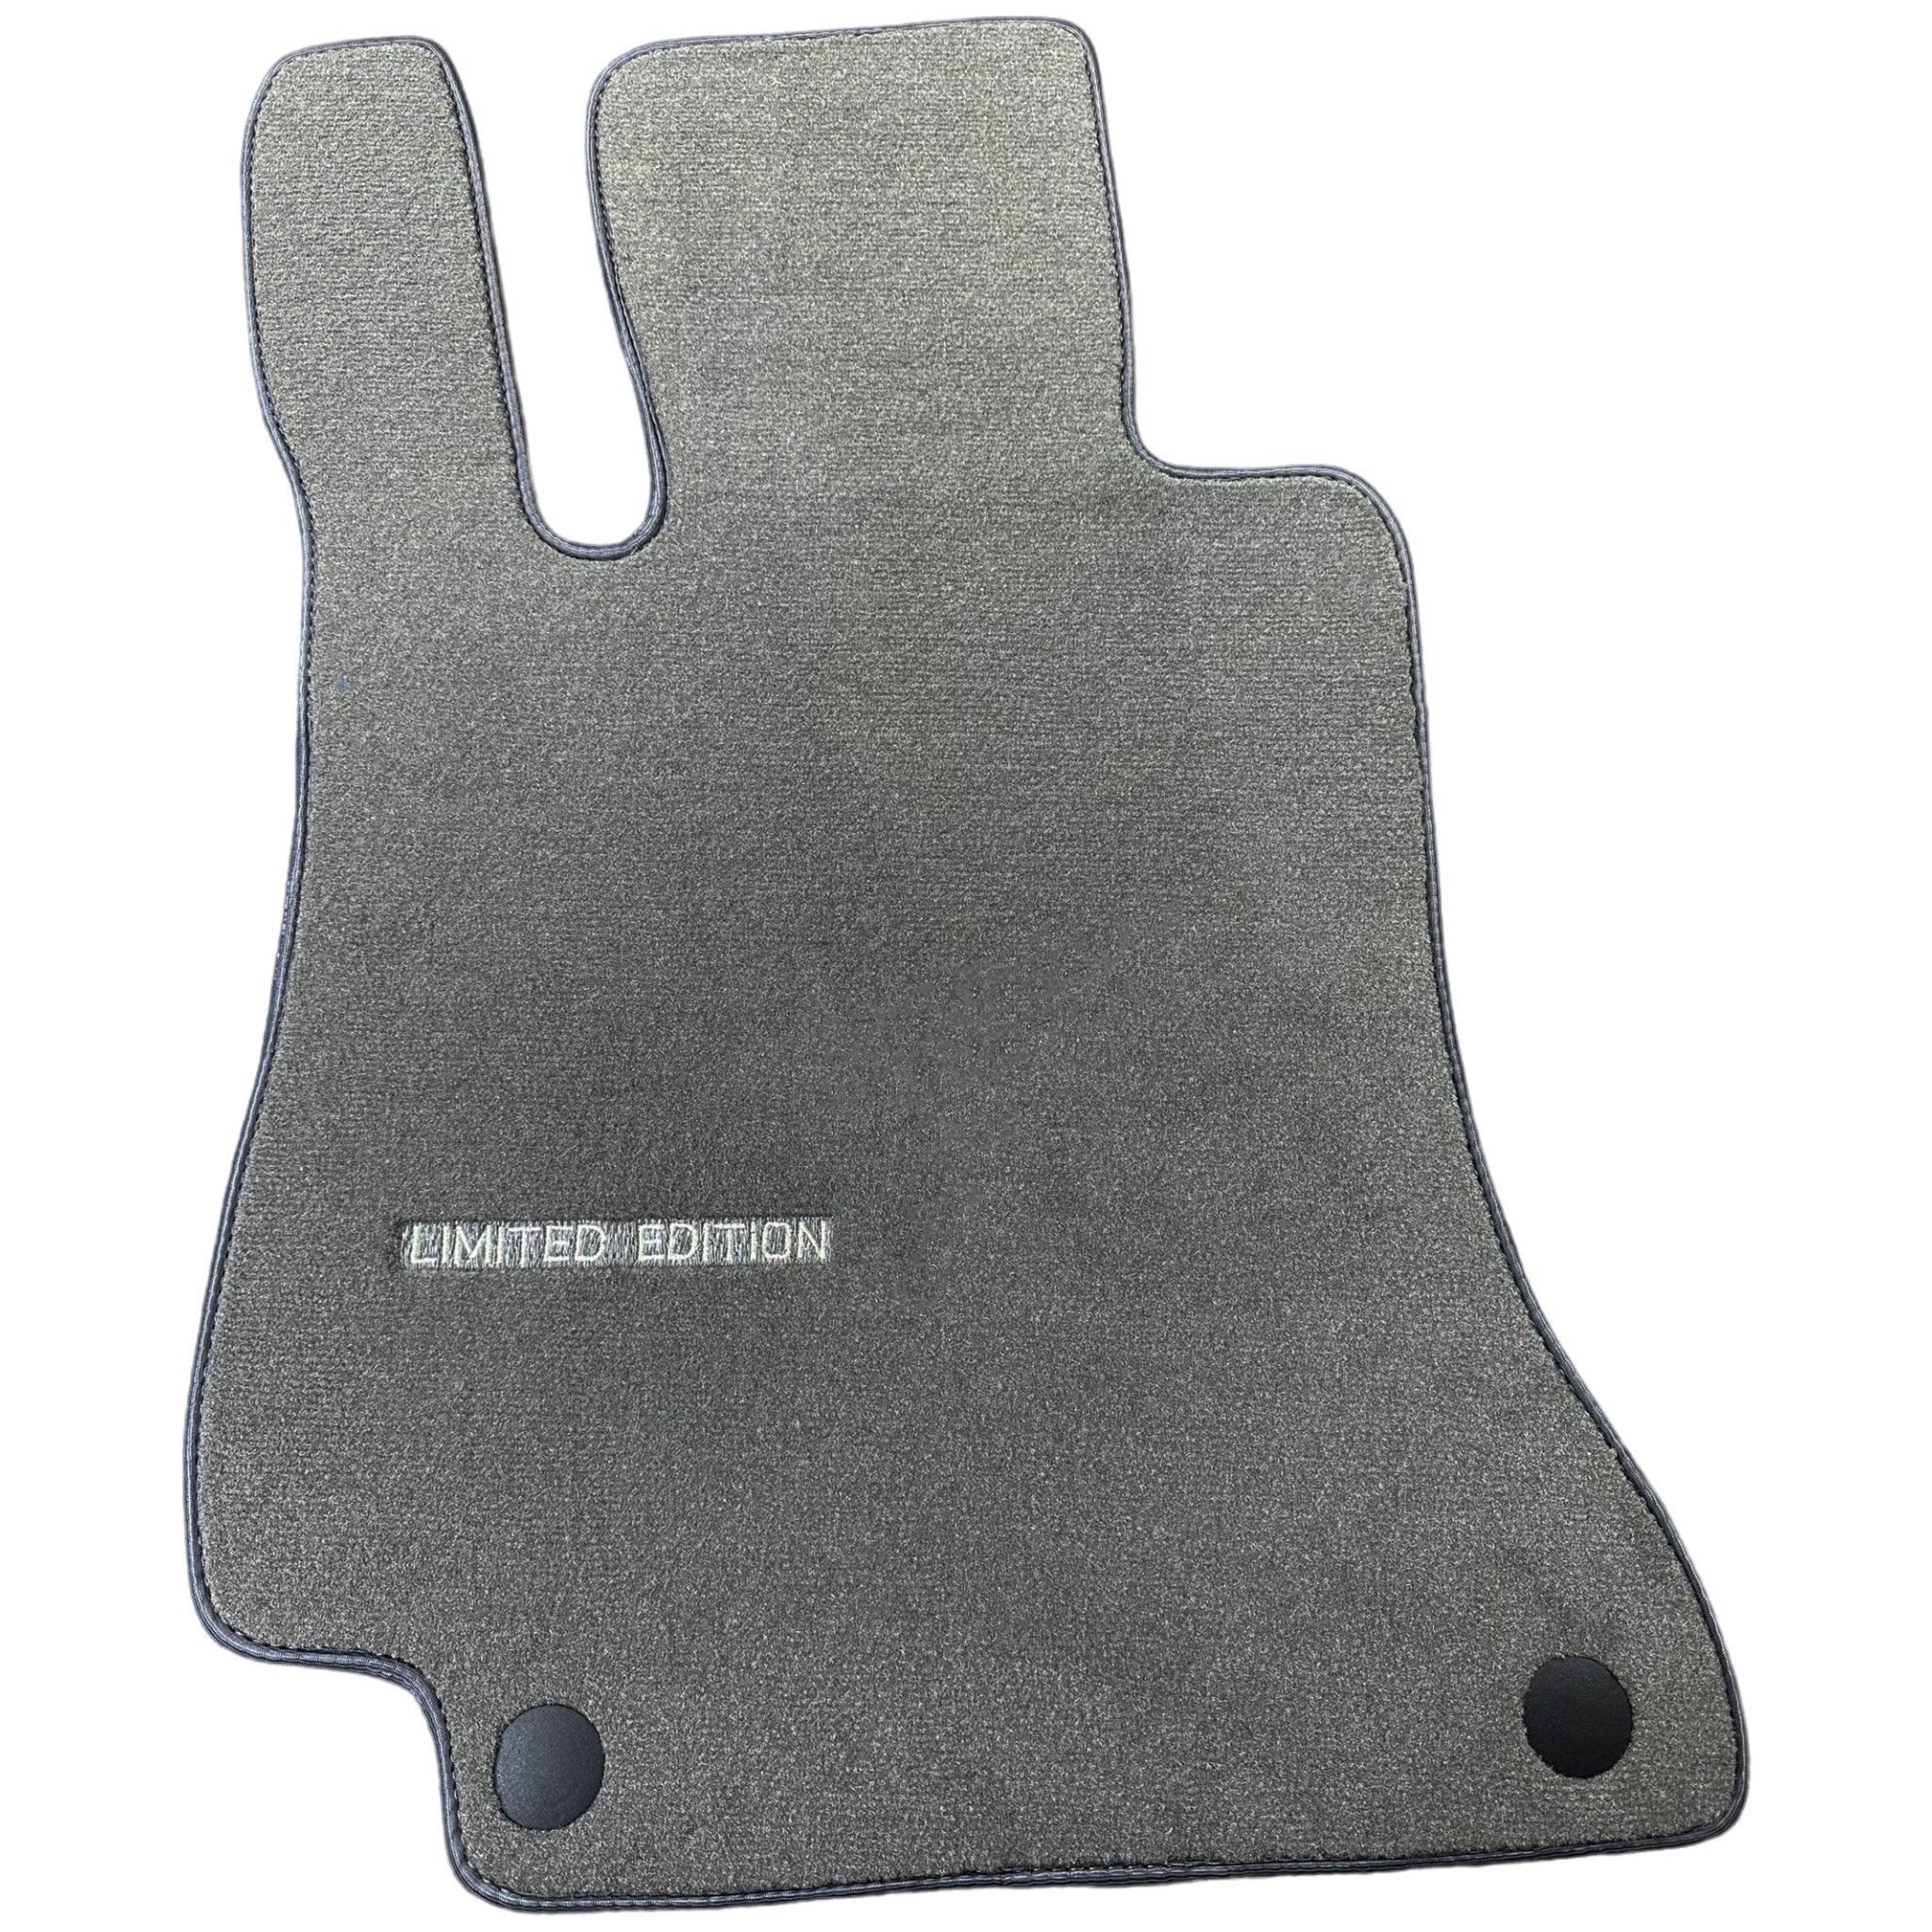 Gray Floor Mats For Mercedes Benz S-Class C126 Coupe (1981-1991) | Limited Edition